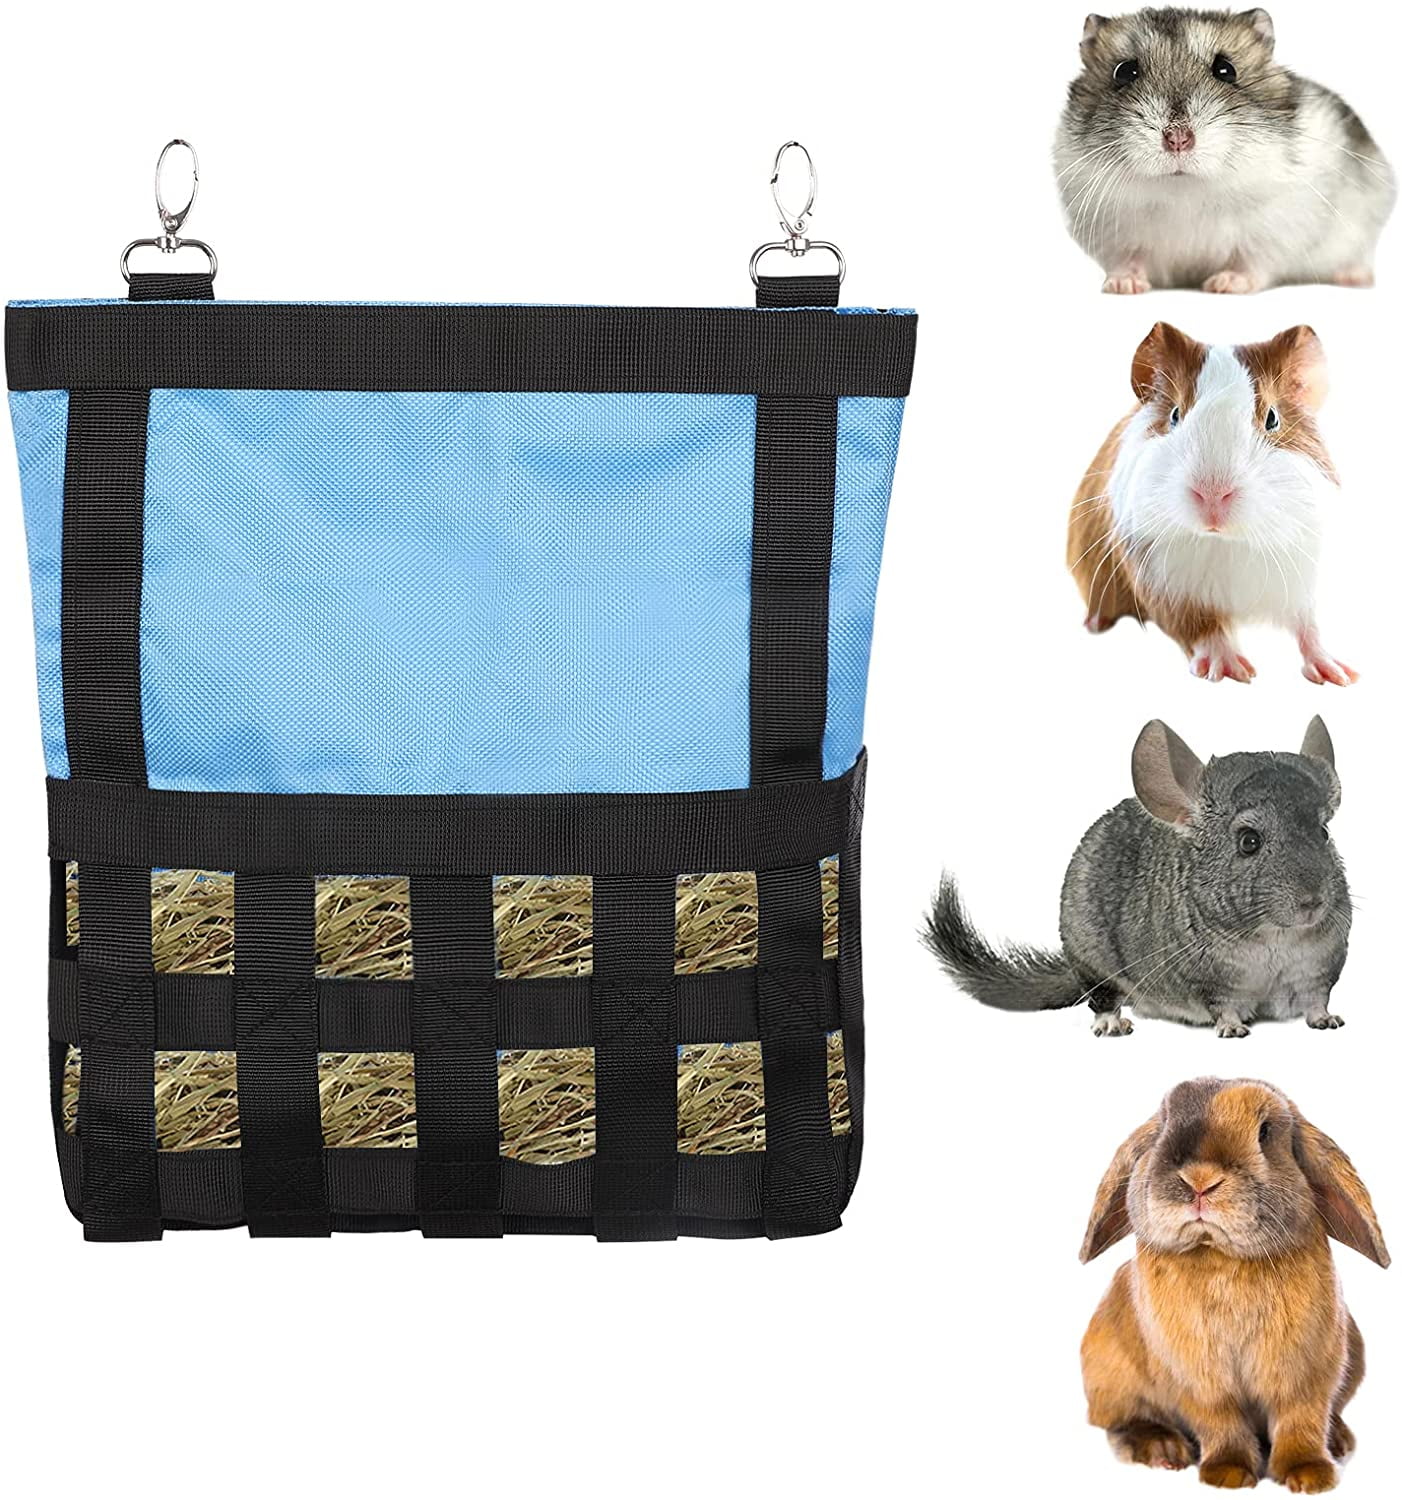 Hamster Chinchillas Rabbit Hay Feeder Storage Sack with 2 Hooks Hanging Feeding Hay Bag Small Large Size Medium Small Pet Hay Feeder Bag for Bunny Guinea Pig 